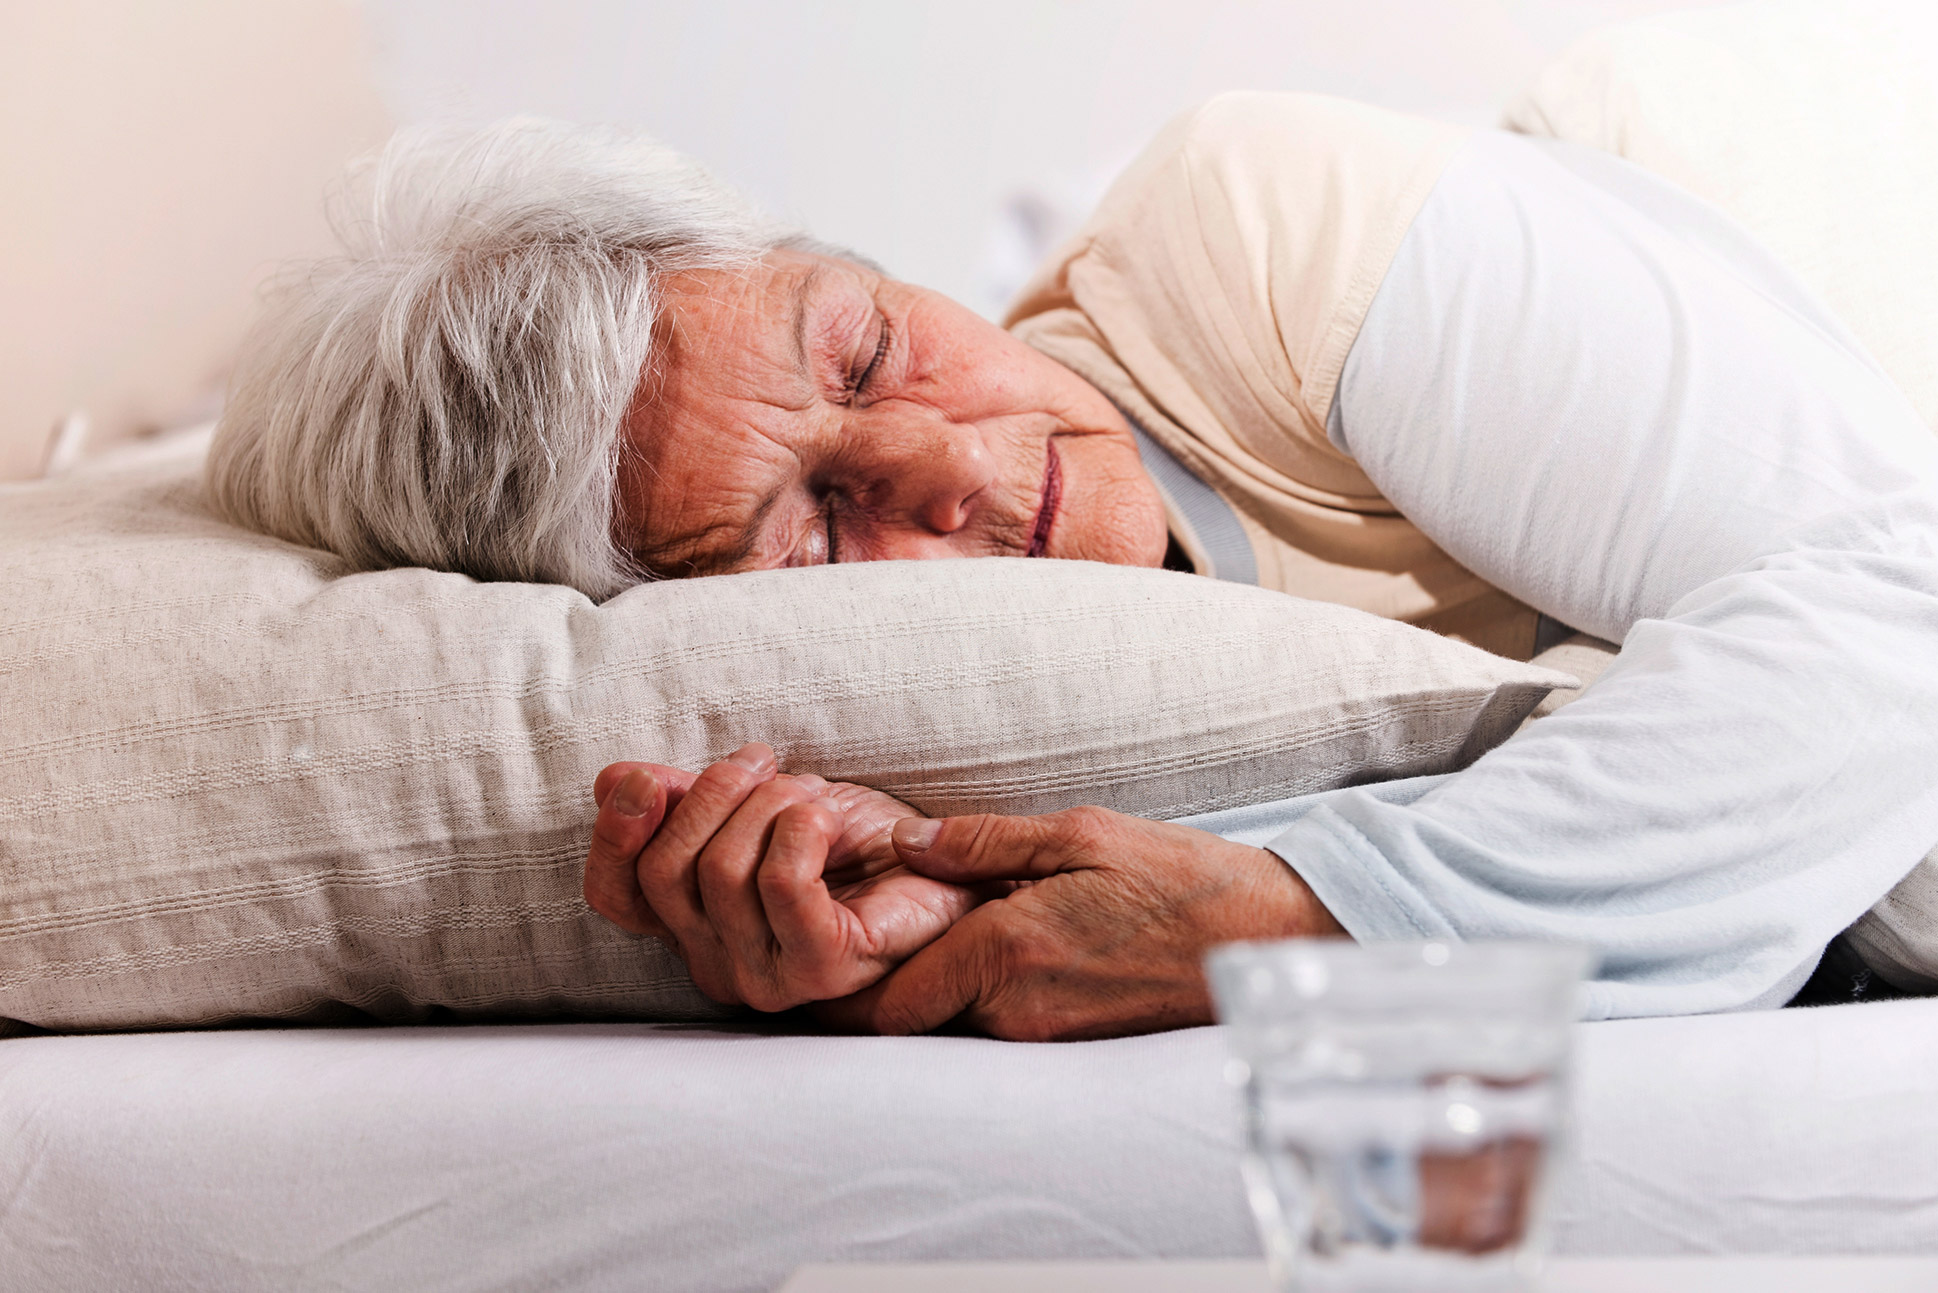 Can Some Sleep Medications Raise the Risk of Alzheimer’s Disease?